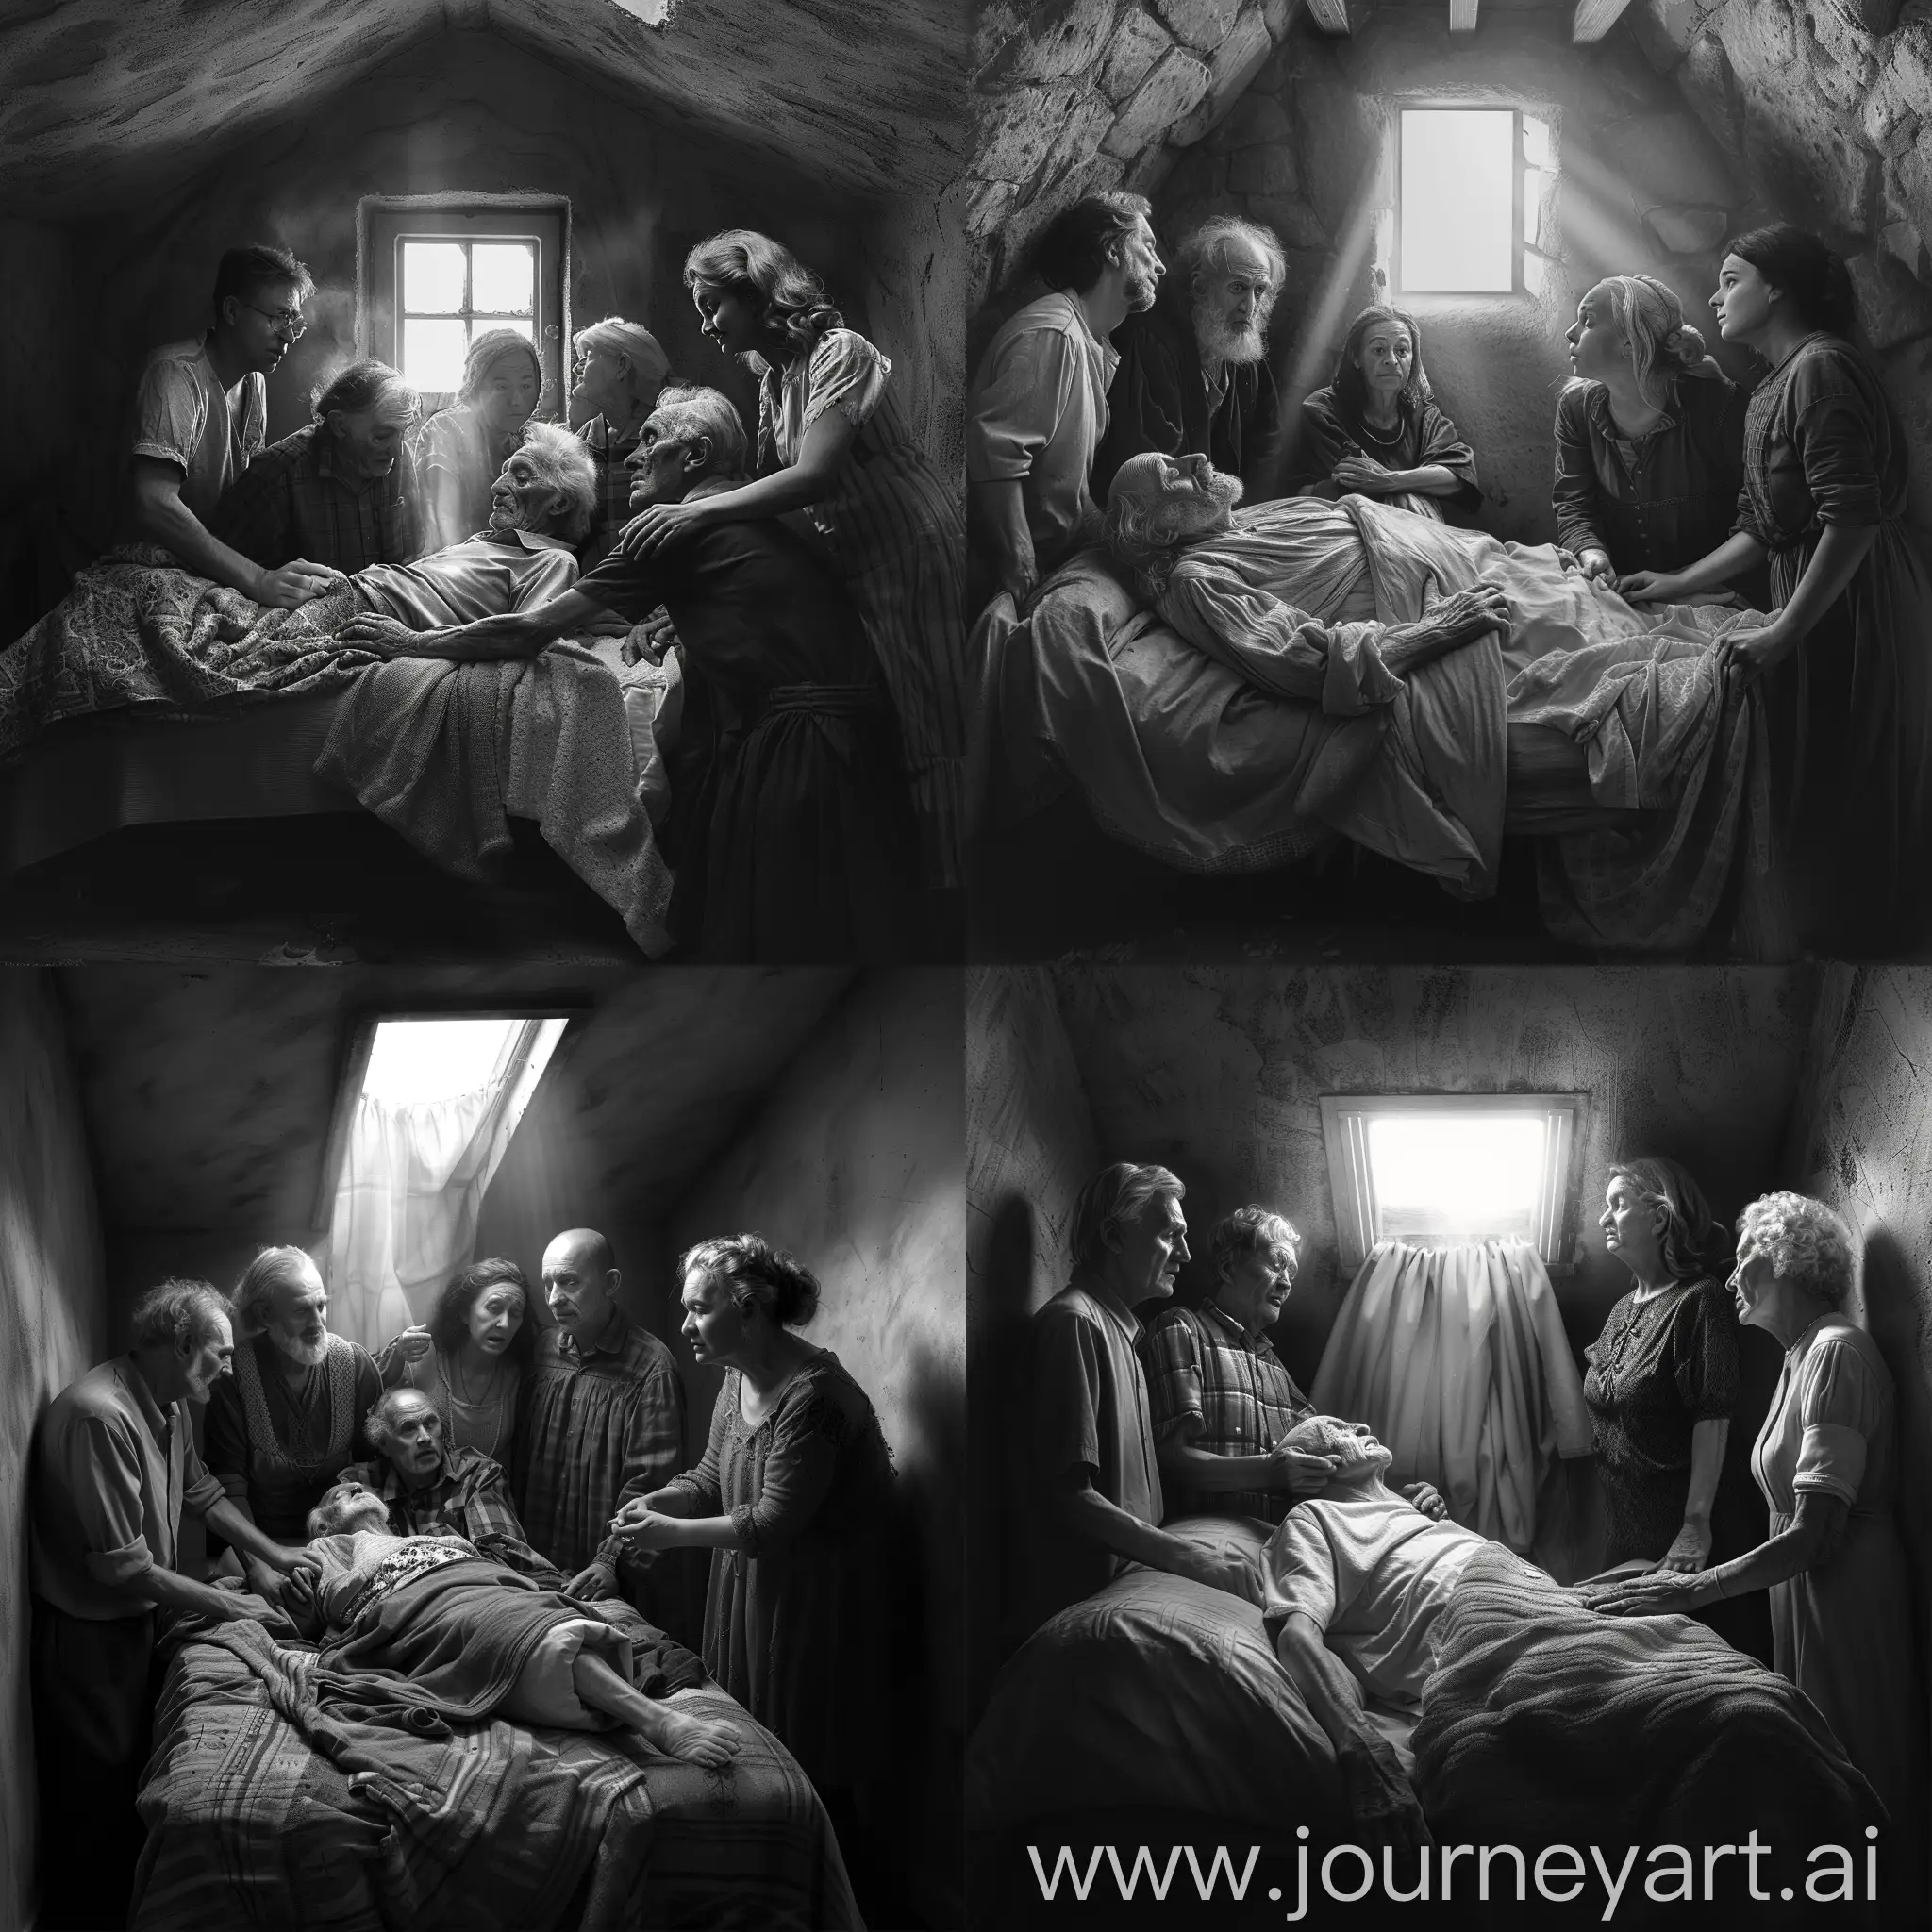 In a cramped room with only a small window of light shining in, an old man is lying on a bed who appears to be dead. Family members include an old woman who is being comforted by a middle-aged woman on the right side of the bed and three middle-aged men on the left side of the bed. and they all look at the old man with a sad expression. The photo should be monochrome
